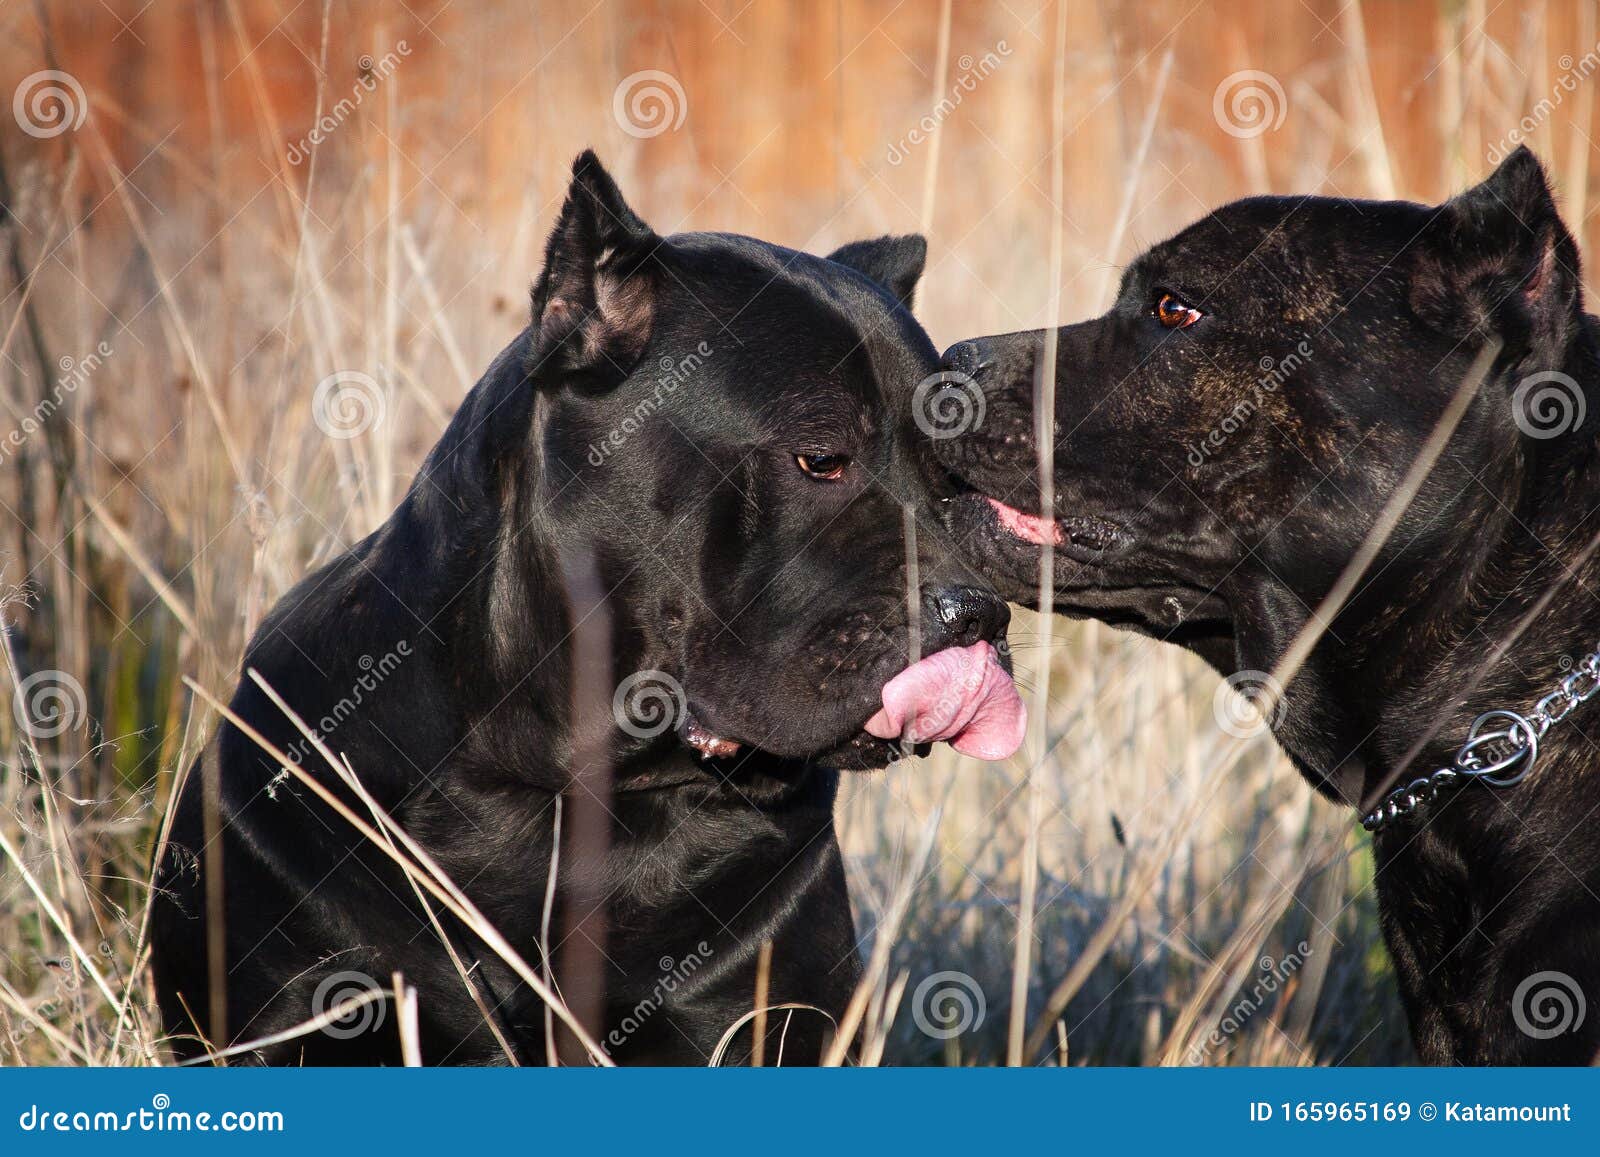 how dogs show each other affection